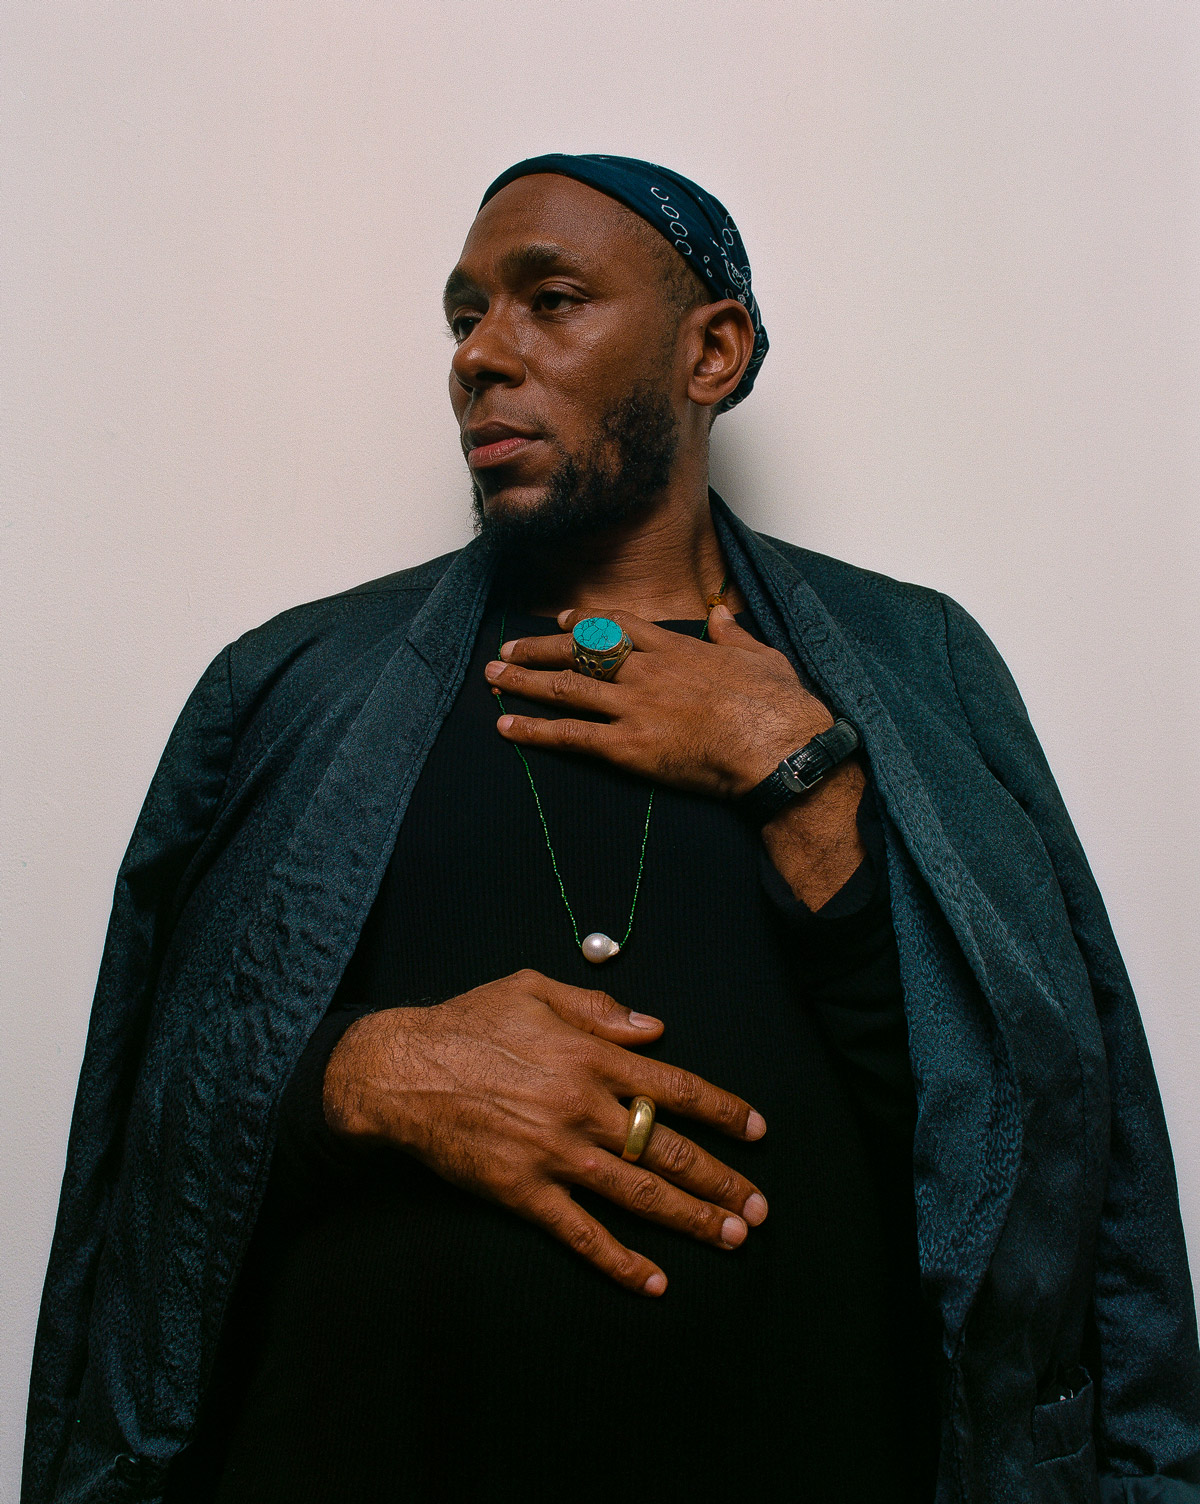 Yasiin Bey released his newest album and all I got was a Polaroid of myself